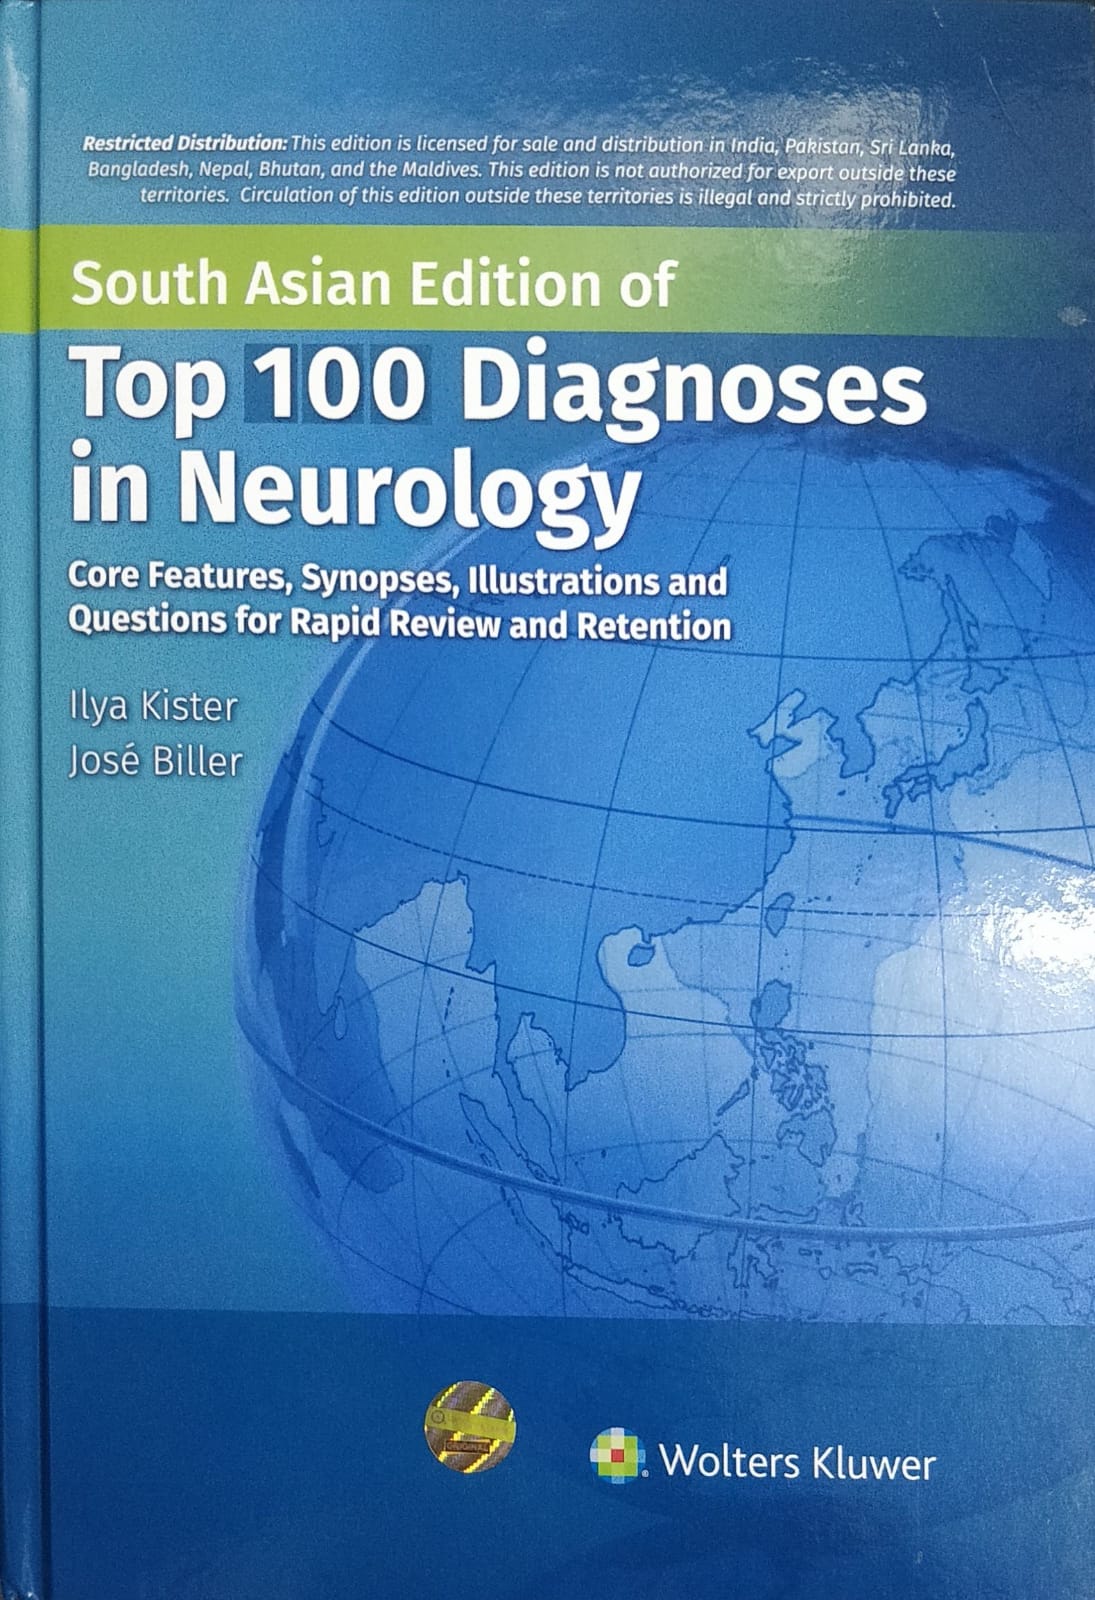 Top 100 Diagnoses In Neurology South Asian Edition (AIBH Exclusive)